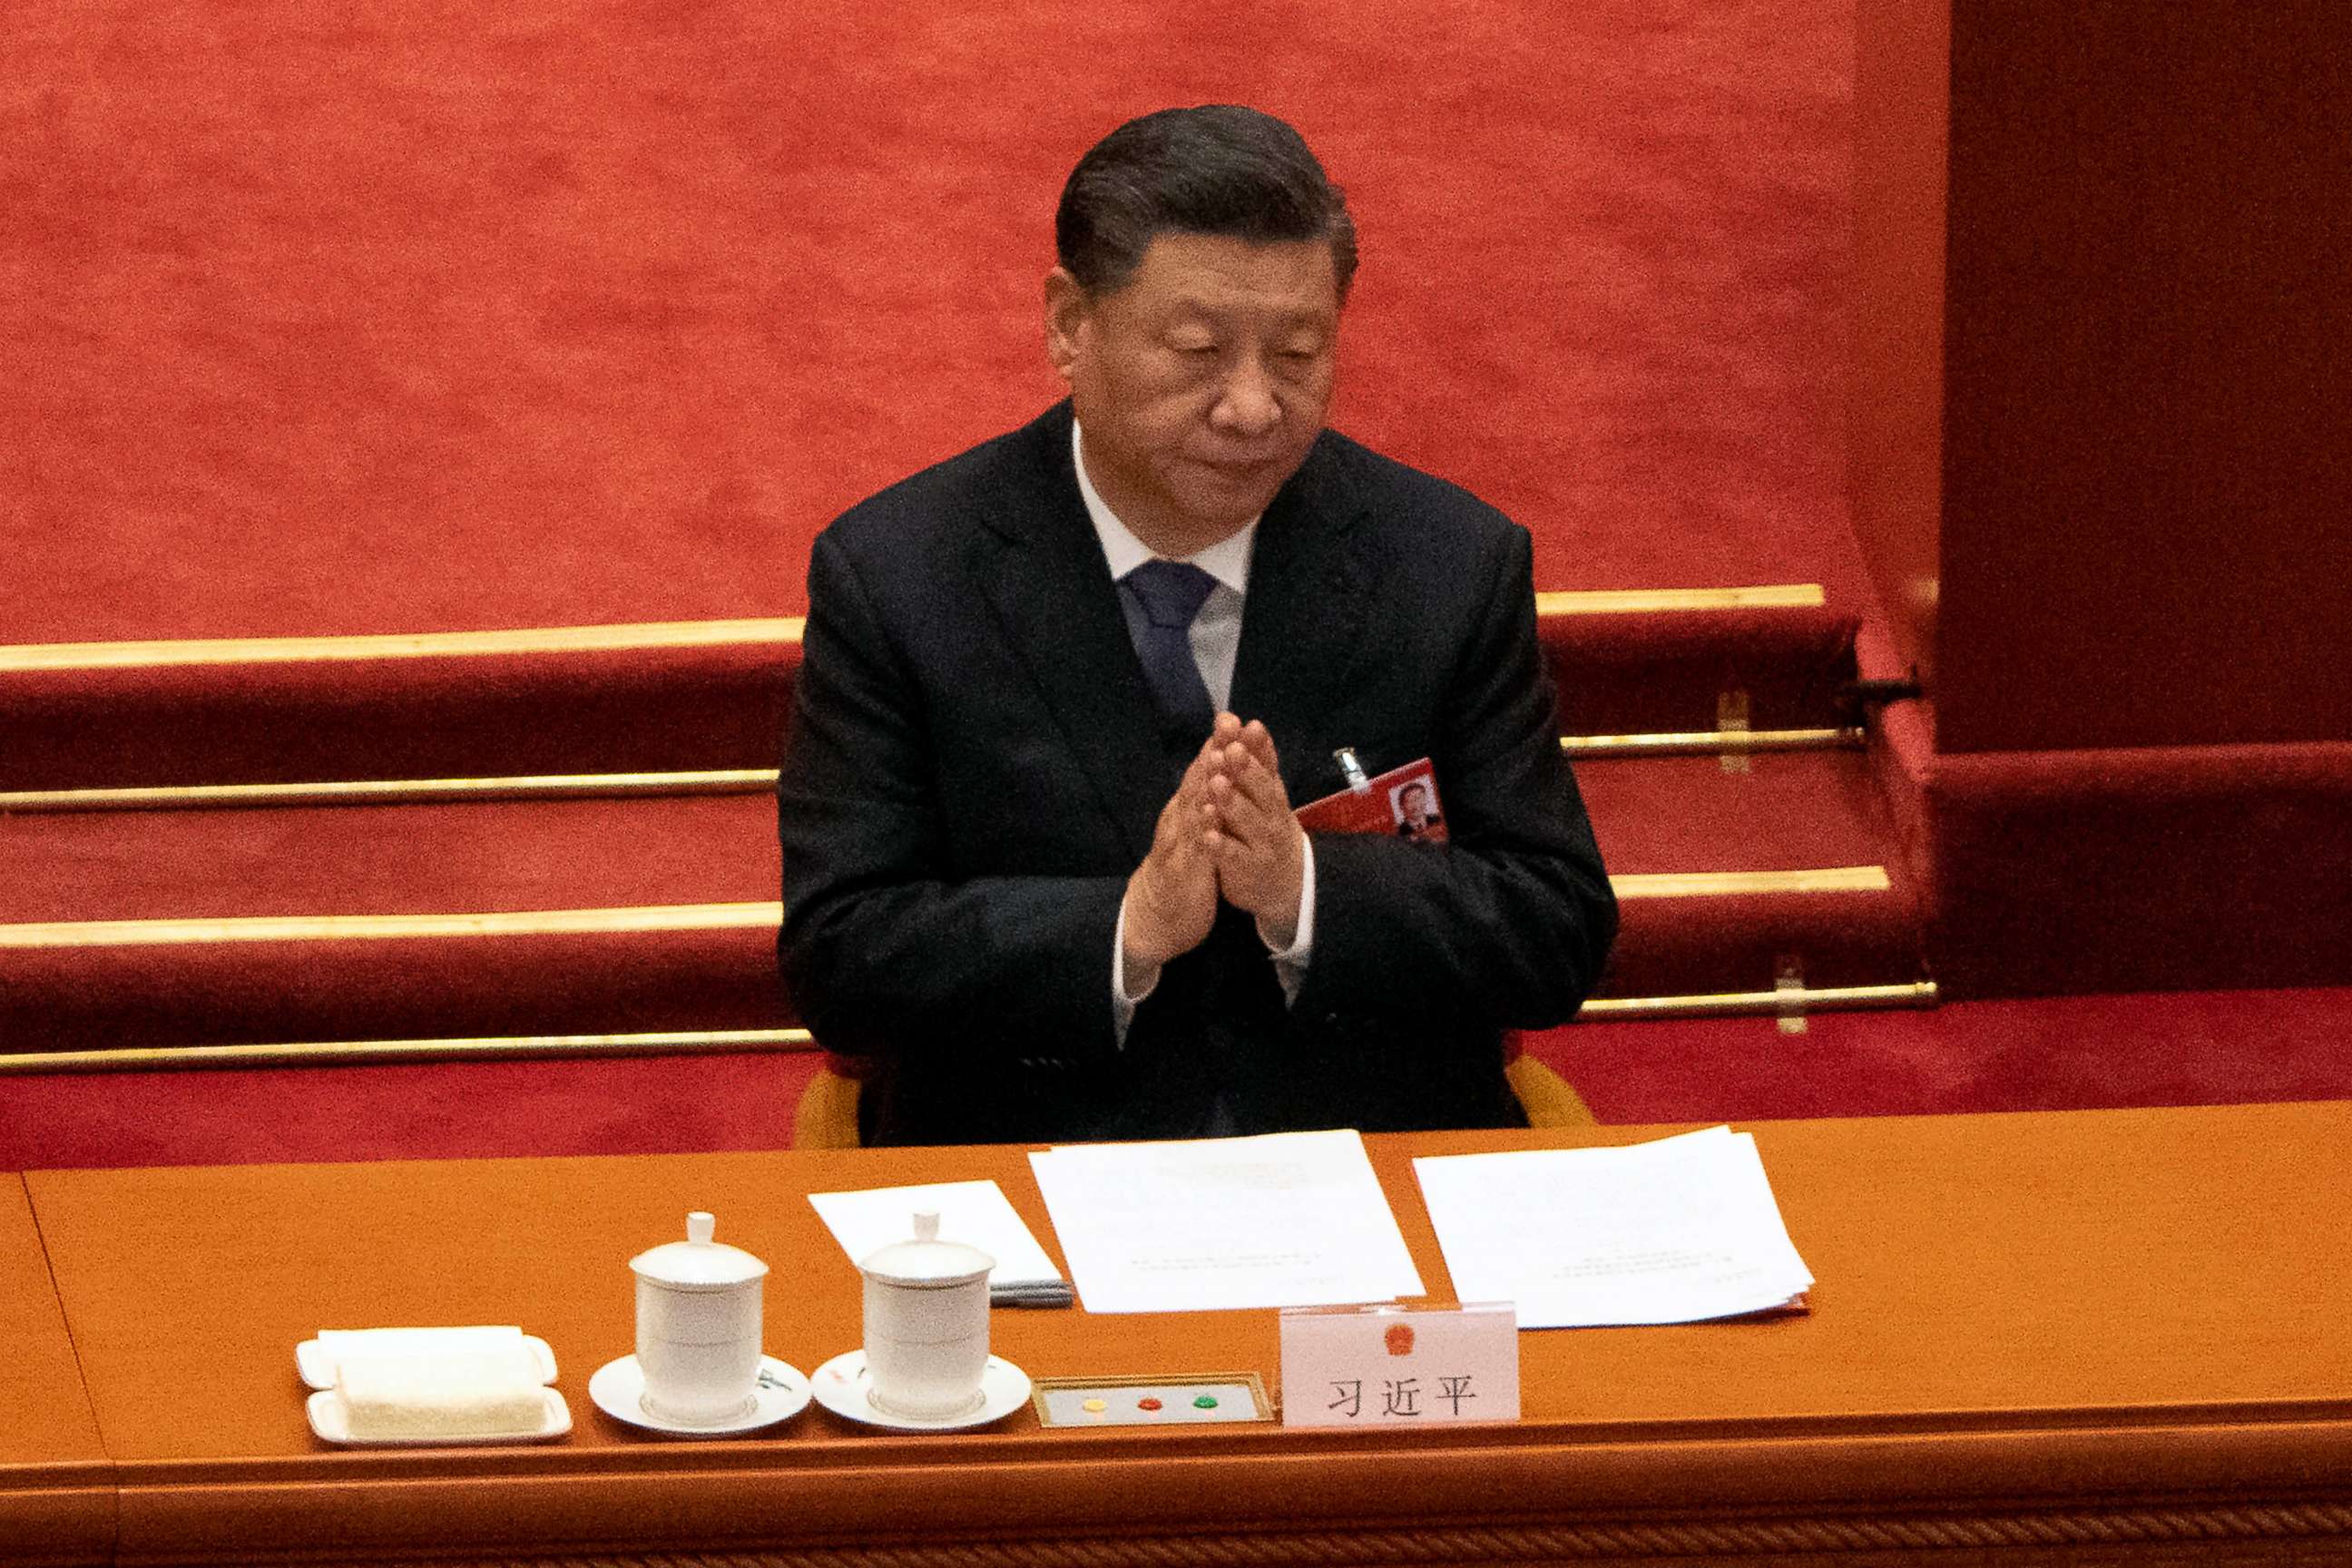 PHOTO: In this March 11, 2022 file photo Chinese President Xi Jinping applauds during the closing session of China's National People's Congress at the Great Hall of the People in Beijing.